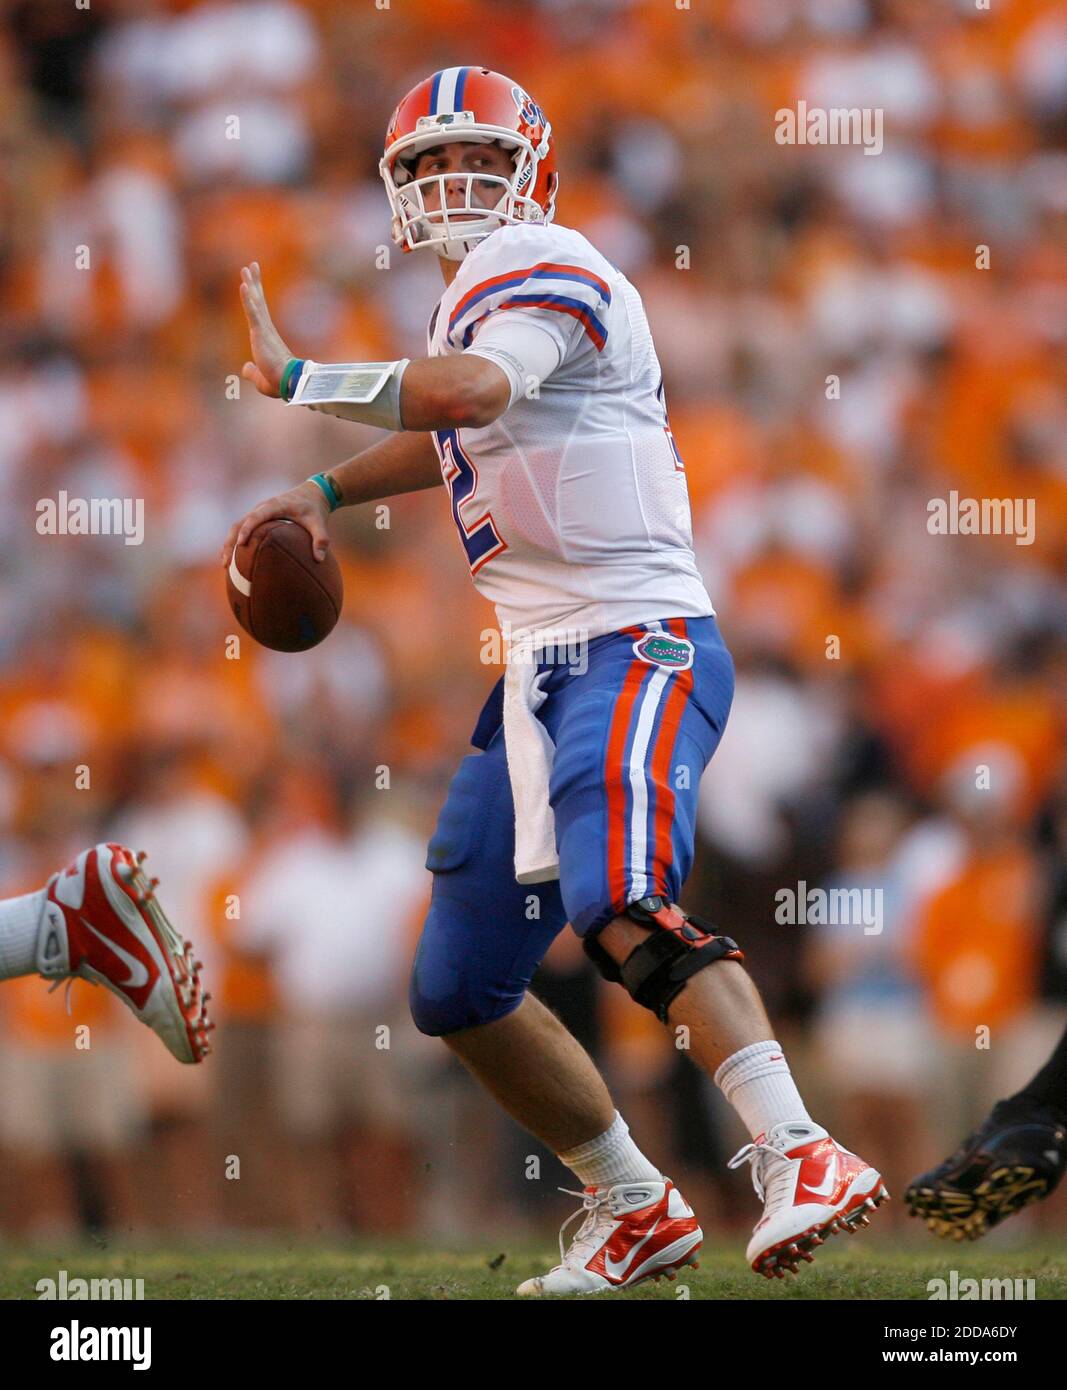 NO FILM, NO VIDEO, NO TV, NO DOCUMENTARY - Florida quarterback John Brantley (12) drops back to pass during NCAA Football match, Tennessee Volunteers vs Florida Gators at Neyland Stadium in Knoxville, USA on September 18, 2010. The Gators won 31-17. Photo by Gary W. Green/MCT/Cameleon/ABACAPRESS.COM Stock Photo